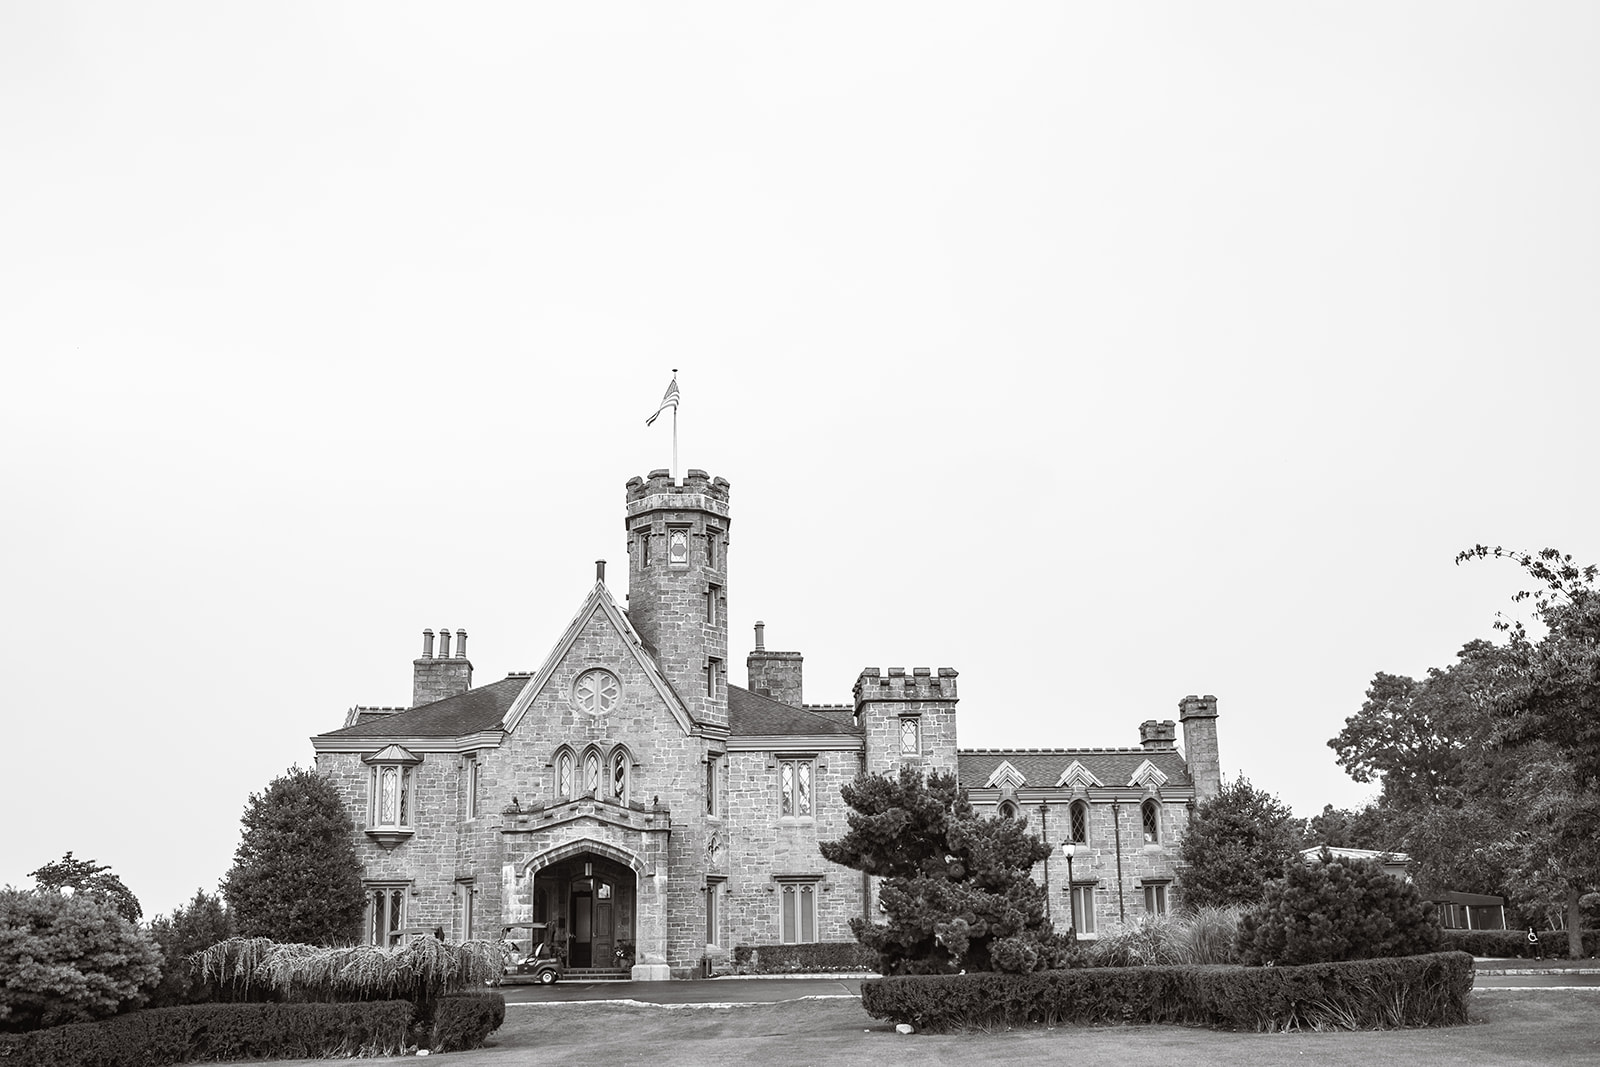 black and white venue photo of whitby castle in rye ny